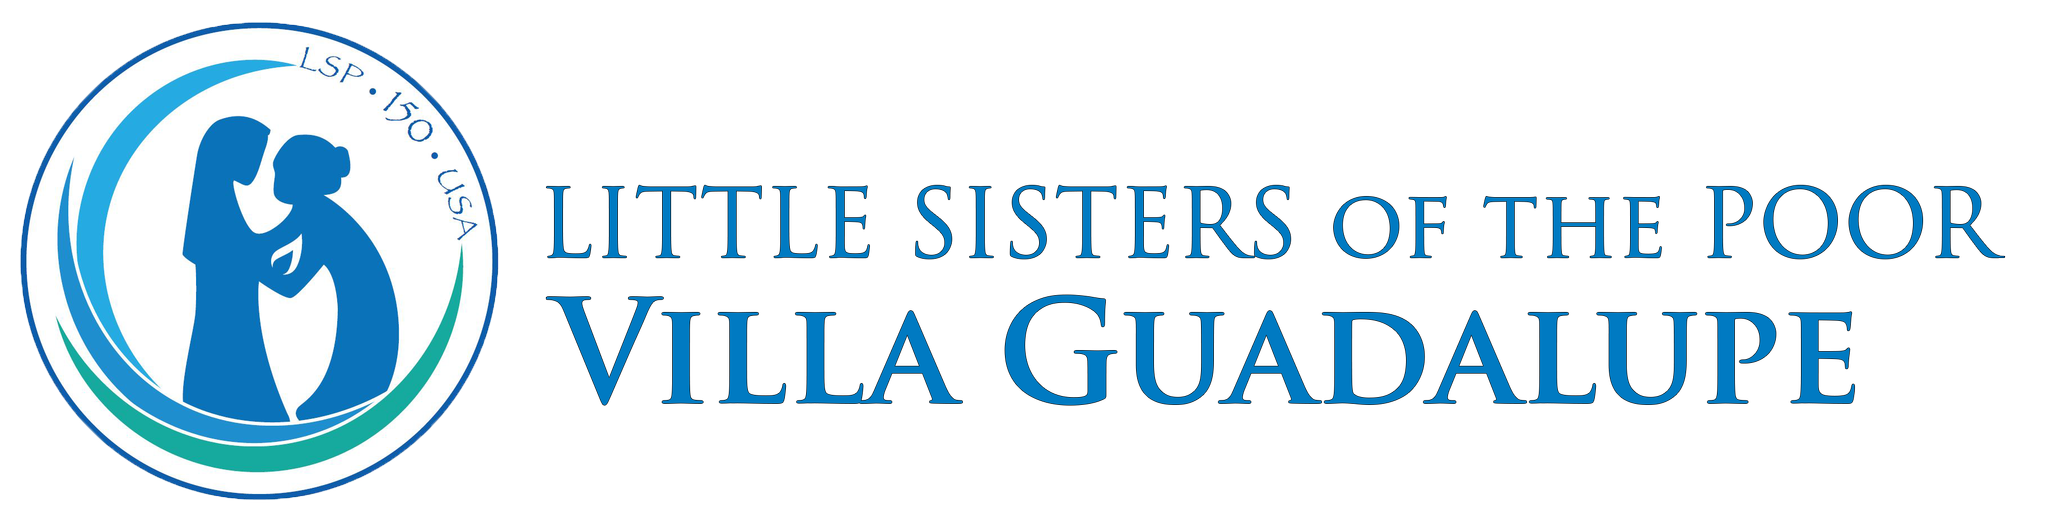 Little Sisters of the Poor Gallup